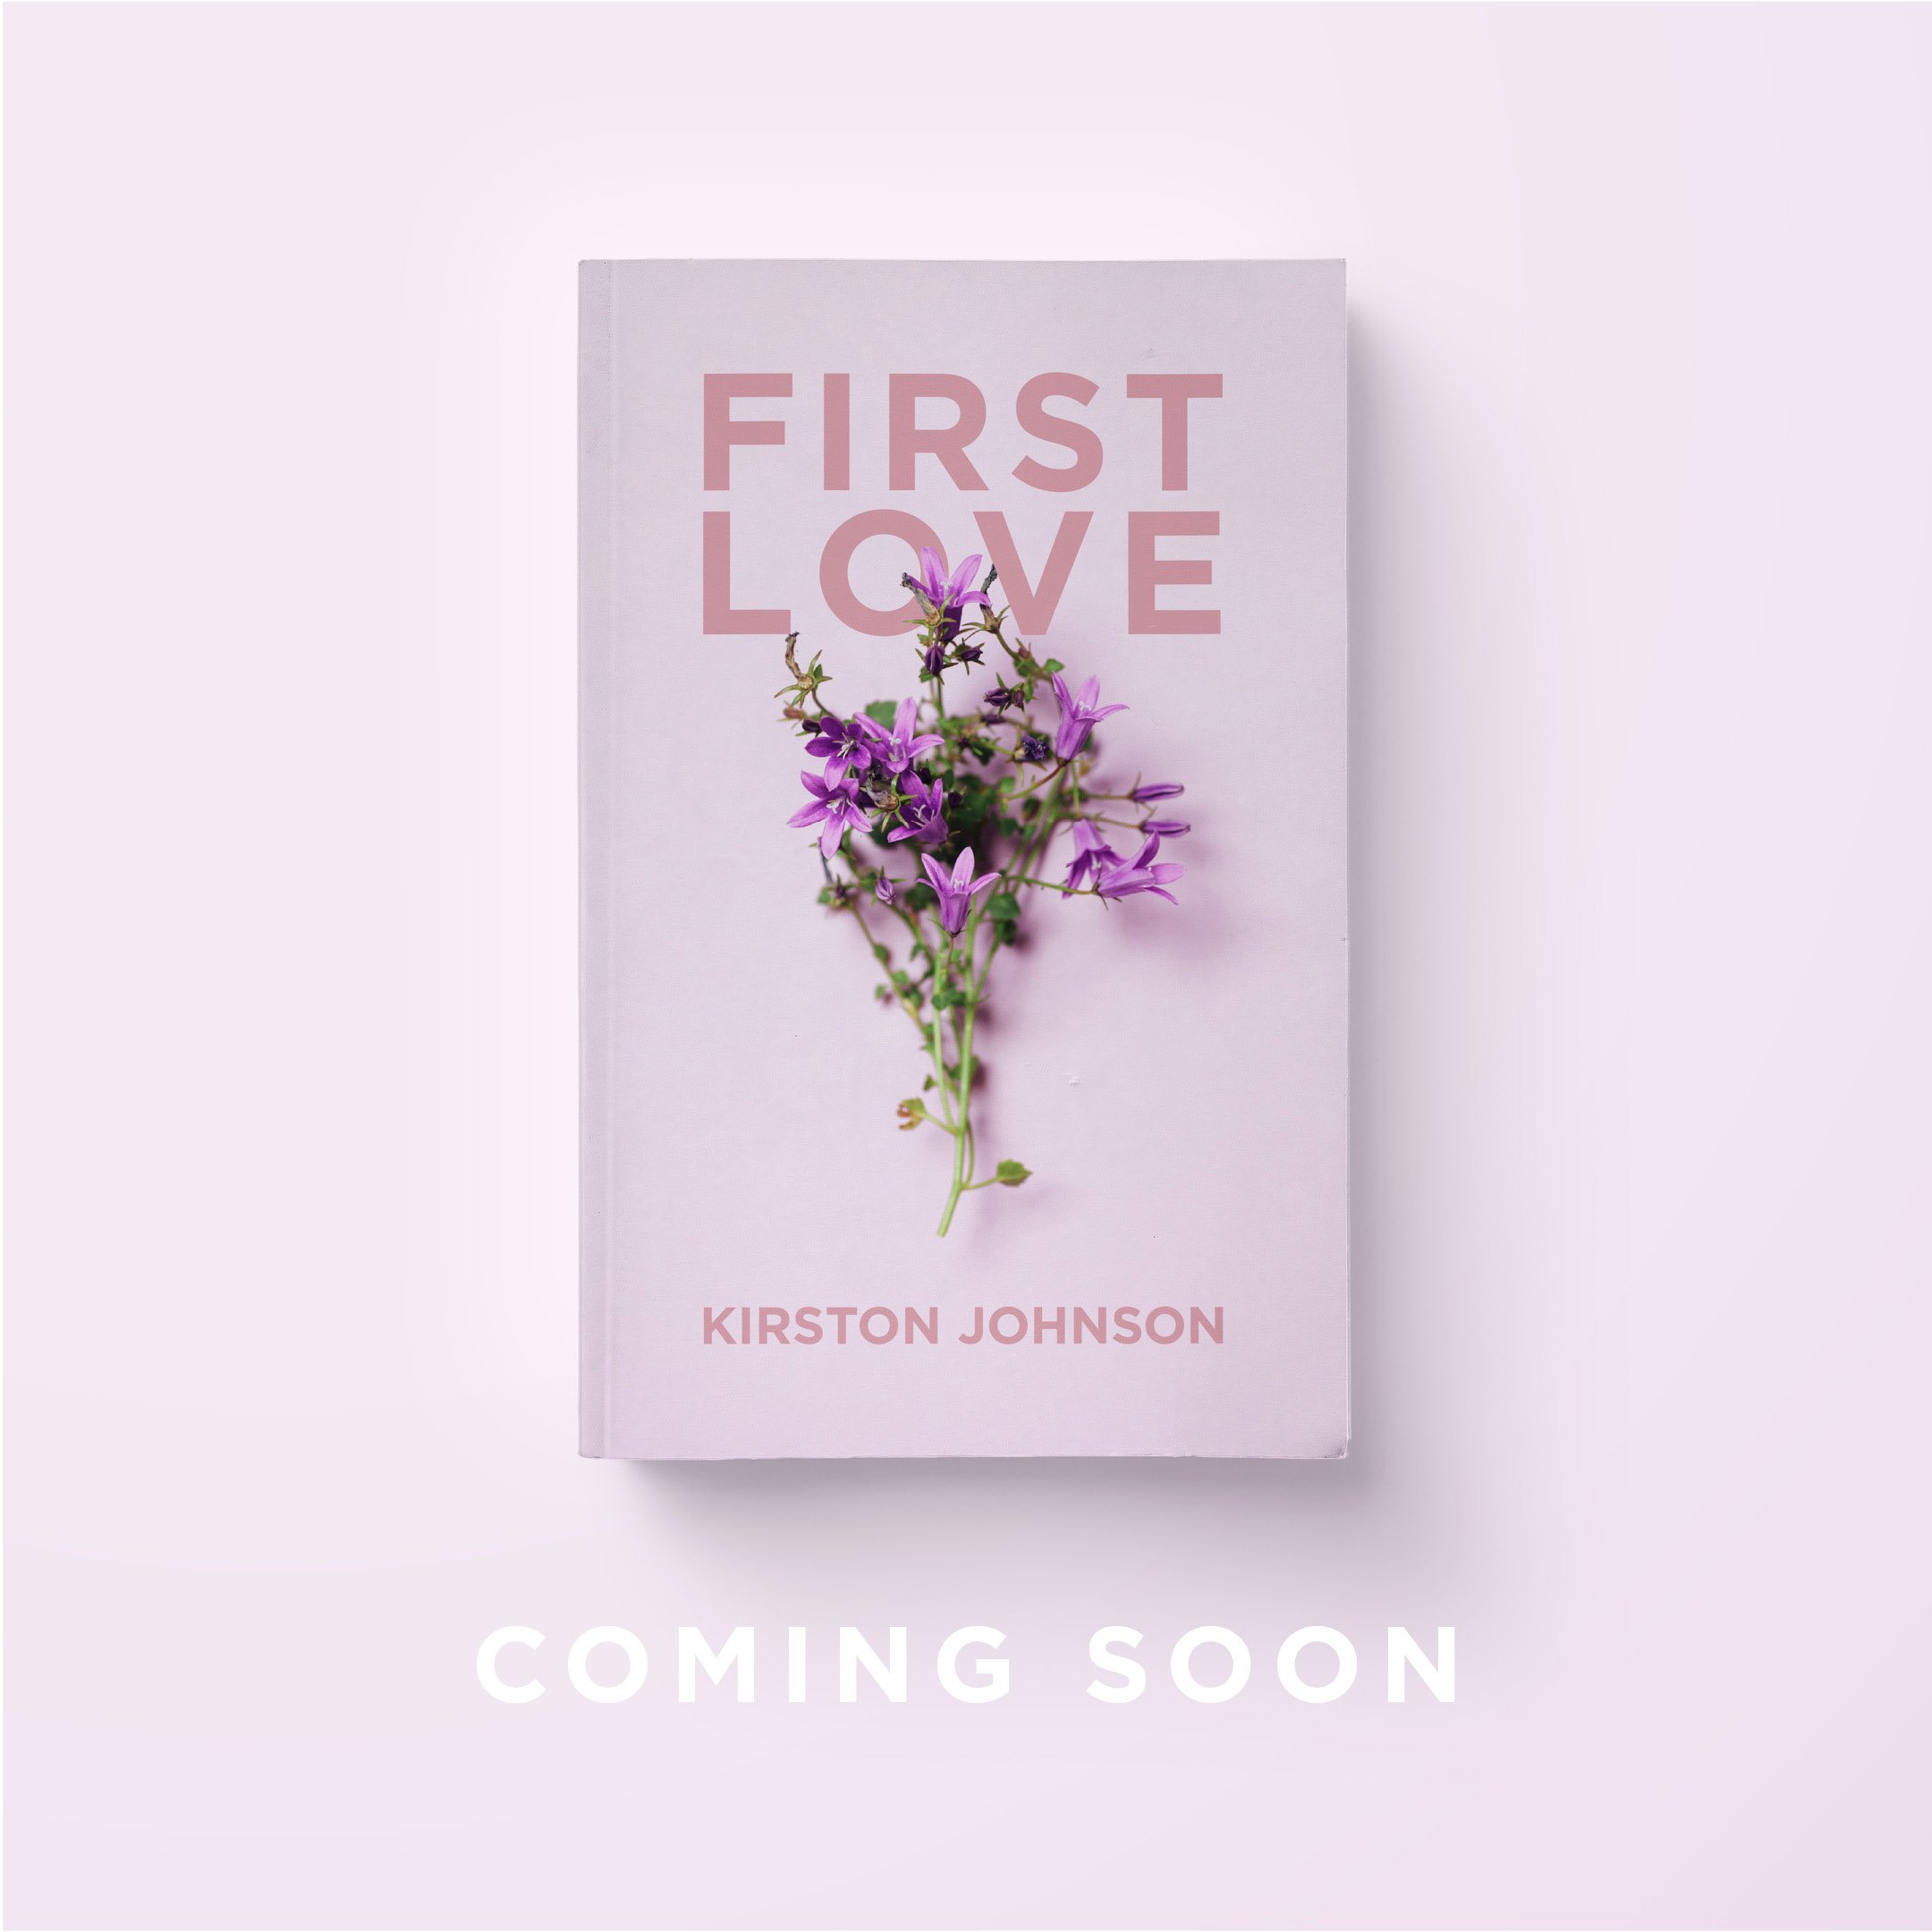 Inspiring women to be who they are created to be! “First Love” is a book about finding freedom in dating and singleness through God becoming your first love!